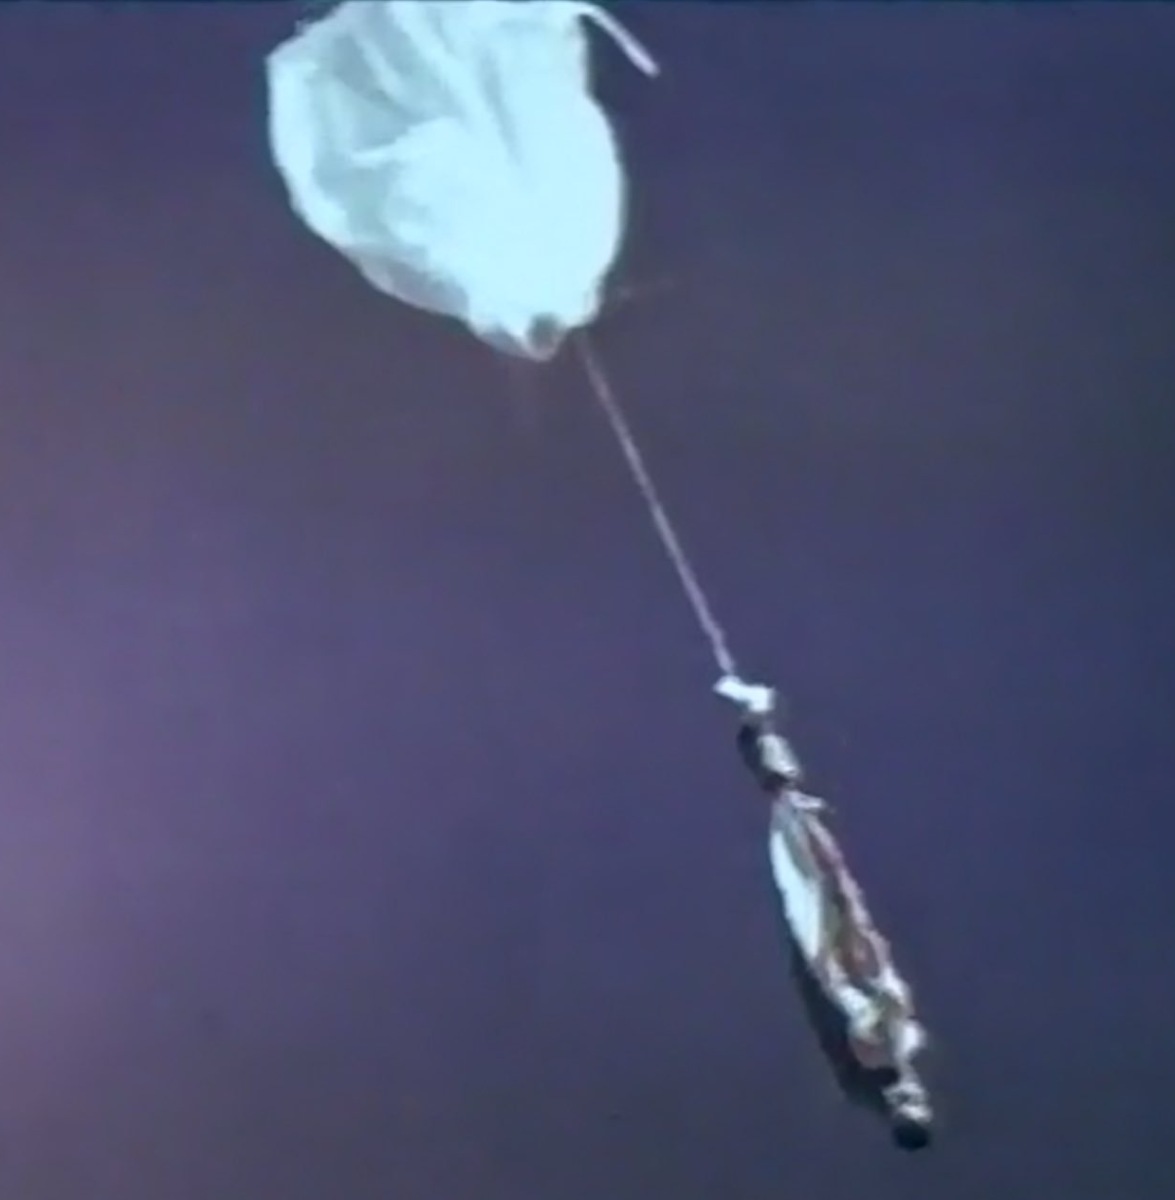 Initial ascent of the balloon. In the bottom part could be seen the canister deployment system